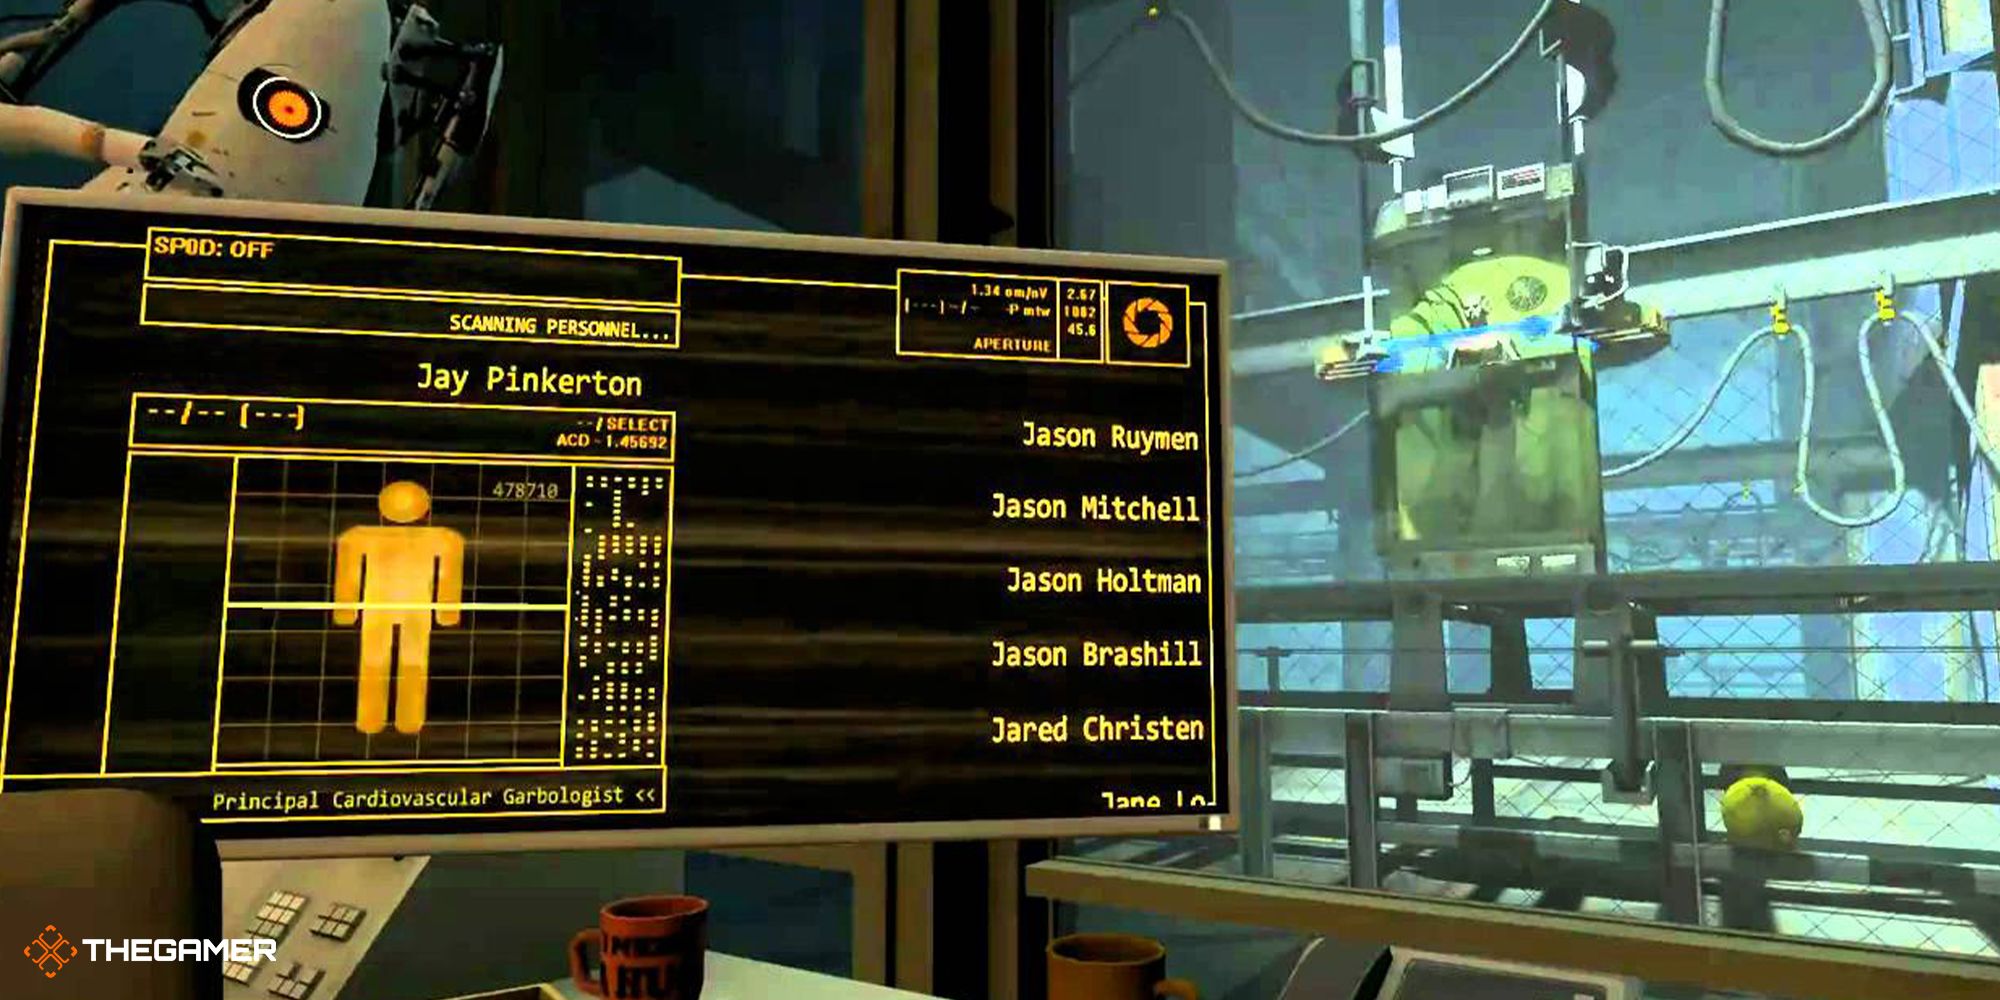 Portal 2 - Co-op ending credits scene with cryogeni subjects